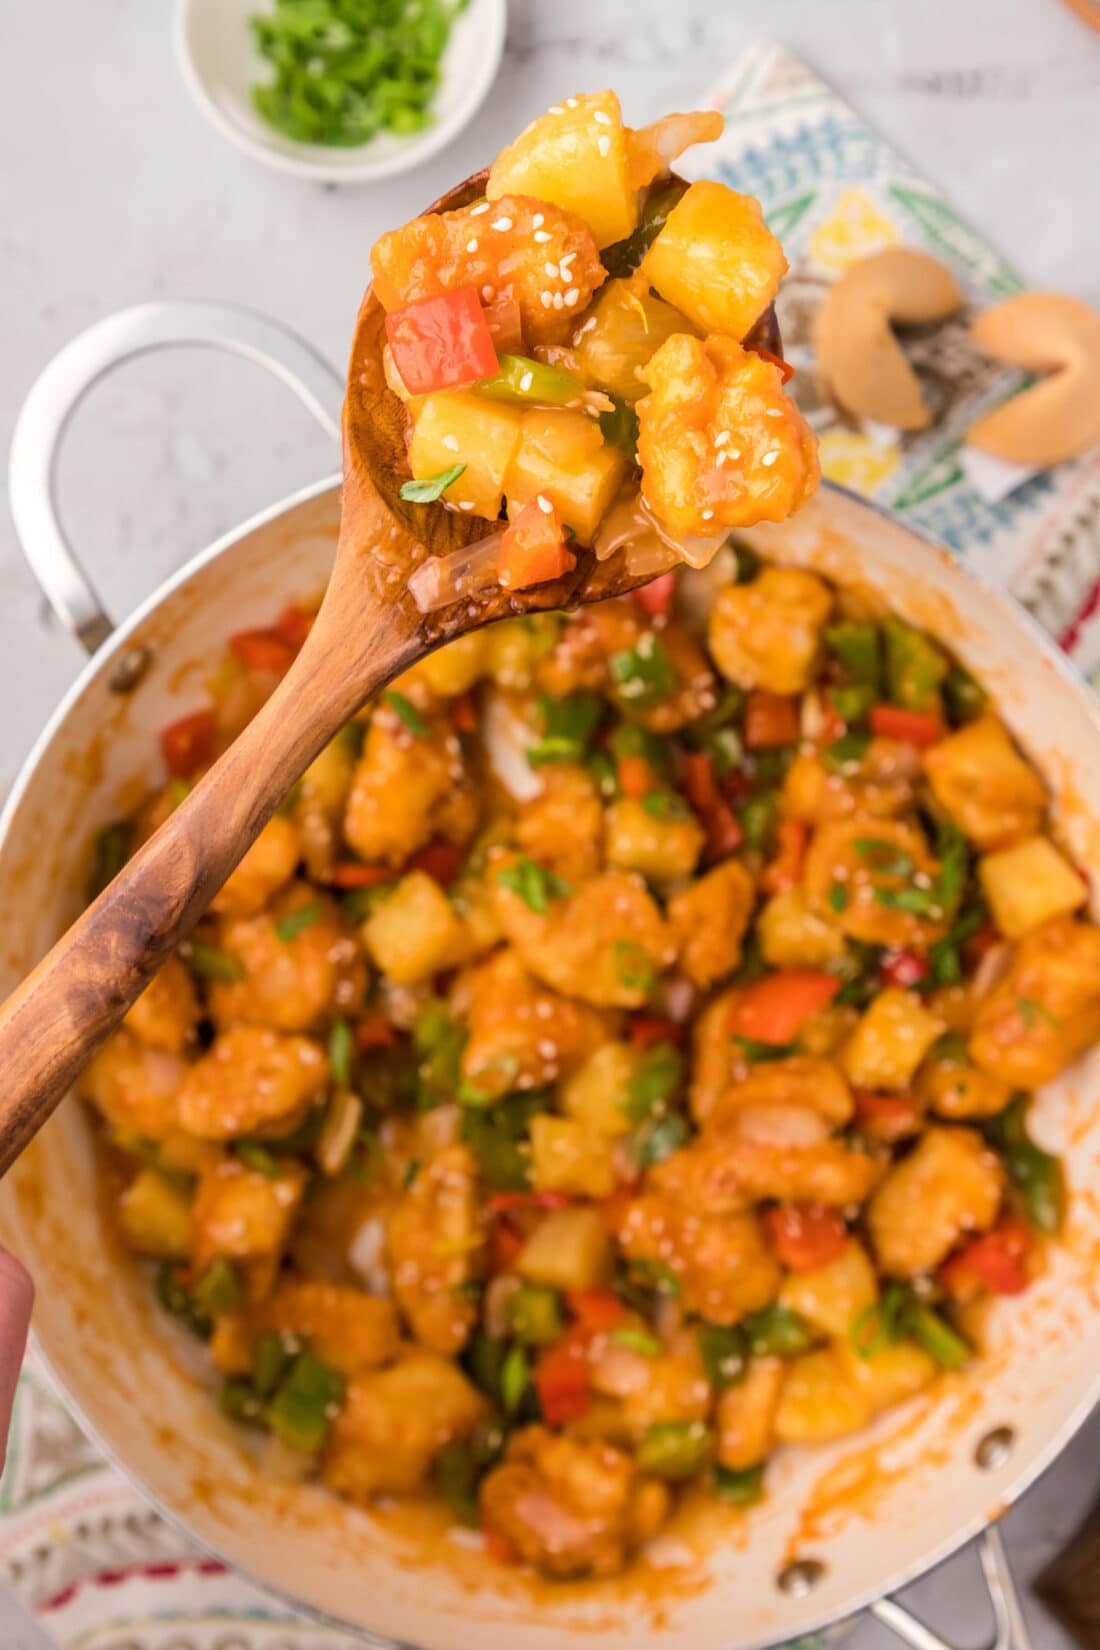 Spoonful of Sweet and Sour Chicken held above a skillet of Sweet and Sour Chicken